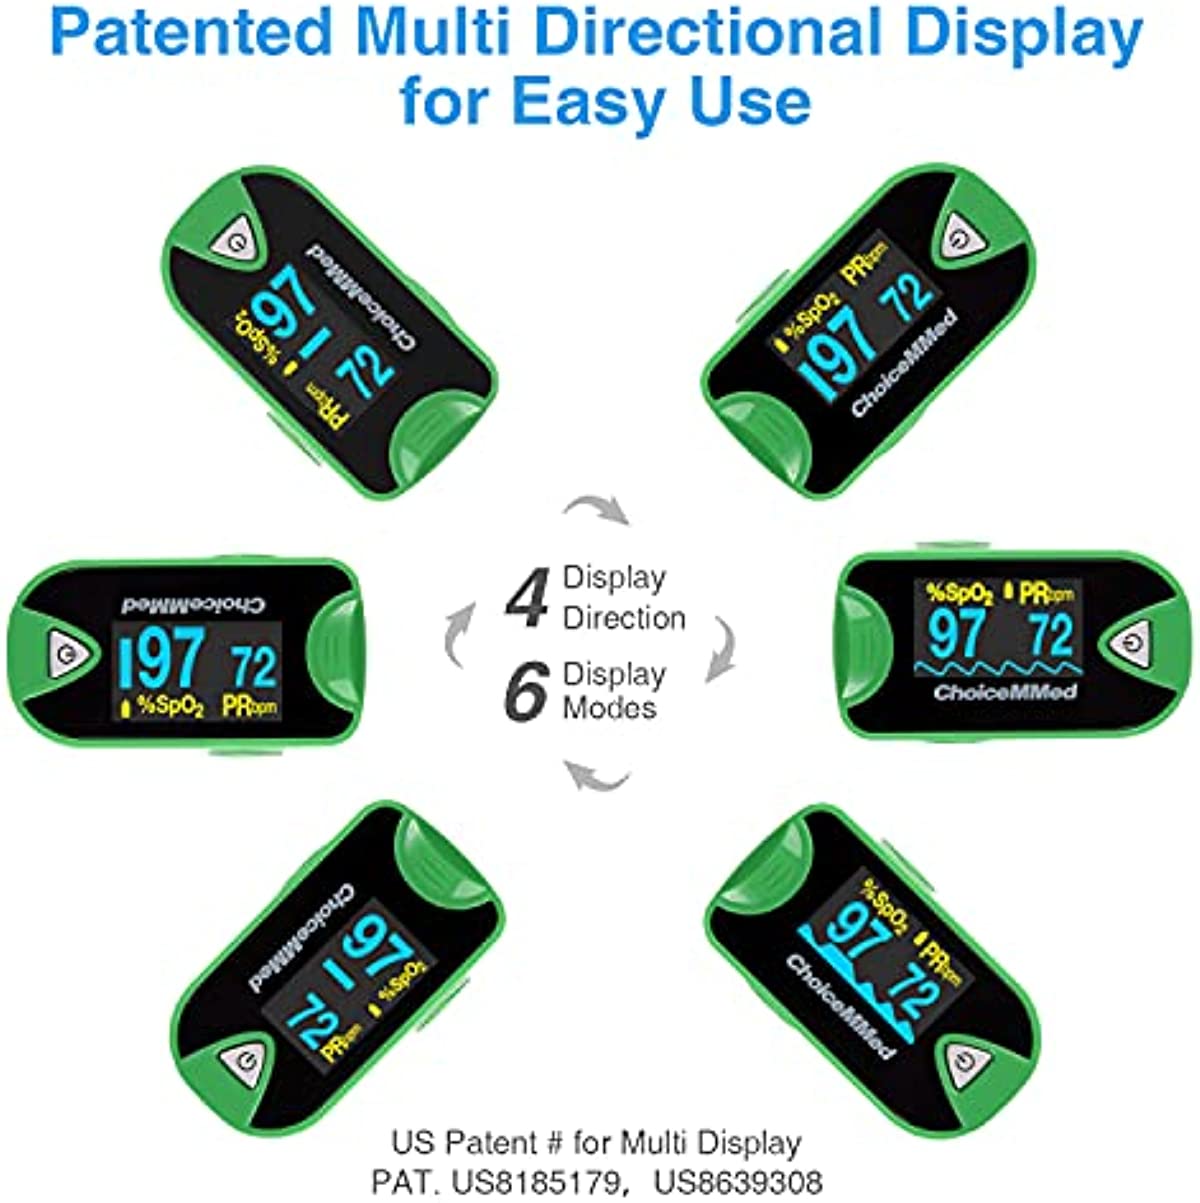 ChoiceMMed Dual Color OLED Finger Pulse Oximeter - Green - Blood Oxygen Saturation Monitor with Color OLED Screen Display and Included Batteries - O2 Saturation Monitor